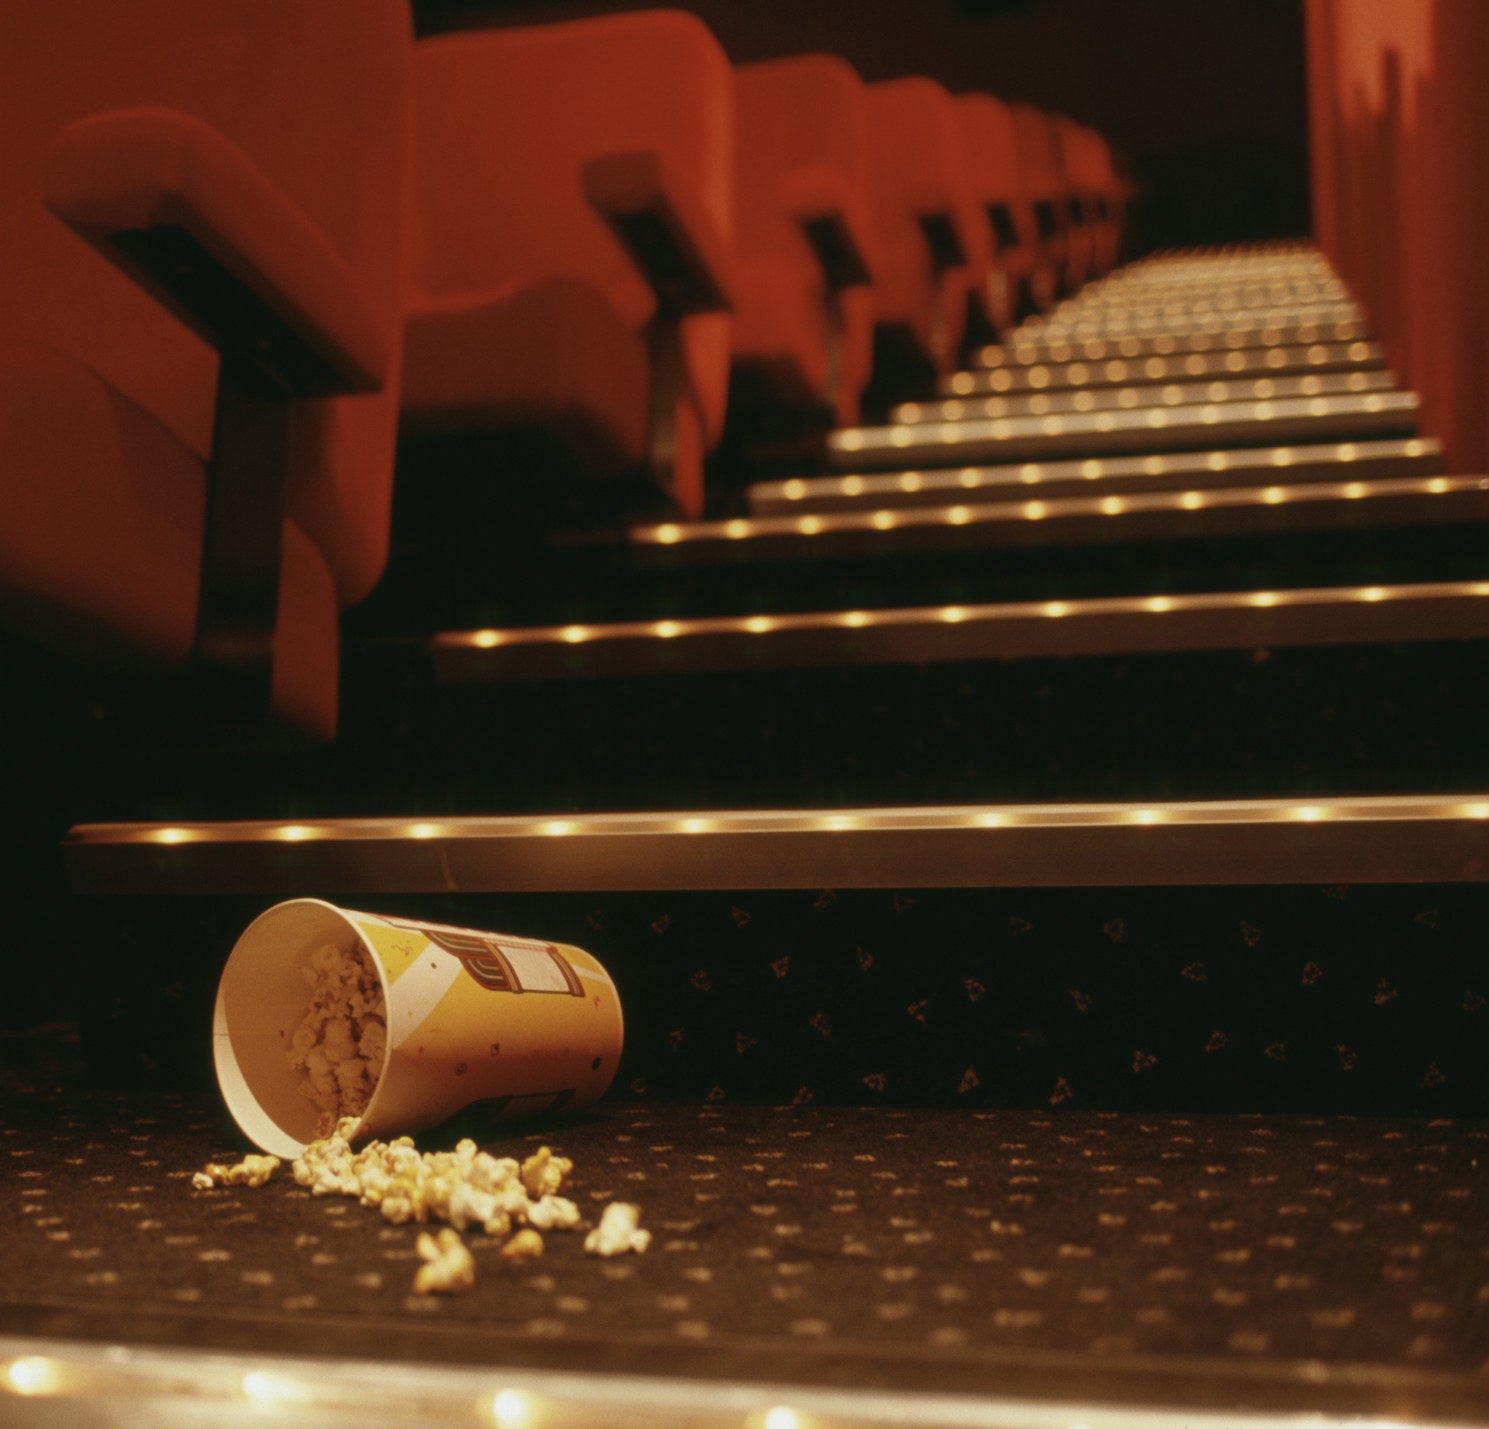 Popcorn spilling from a cup on the floor of an empty movie theater